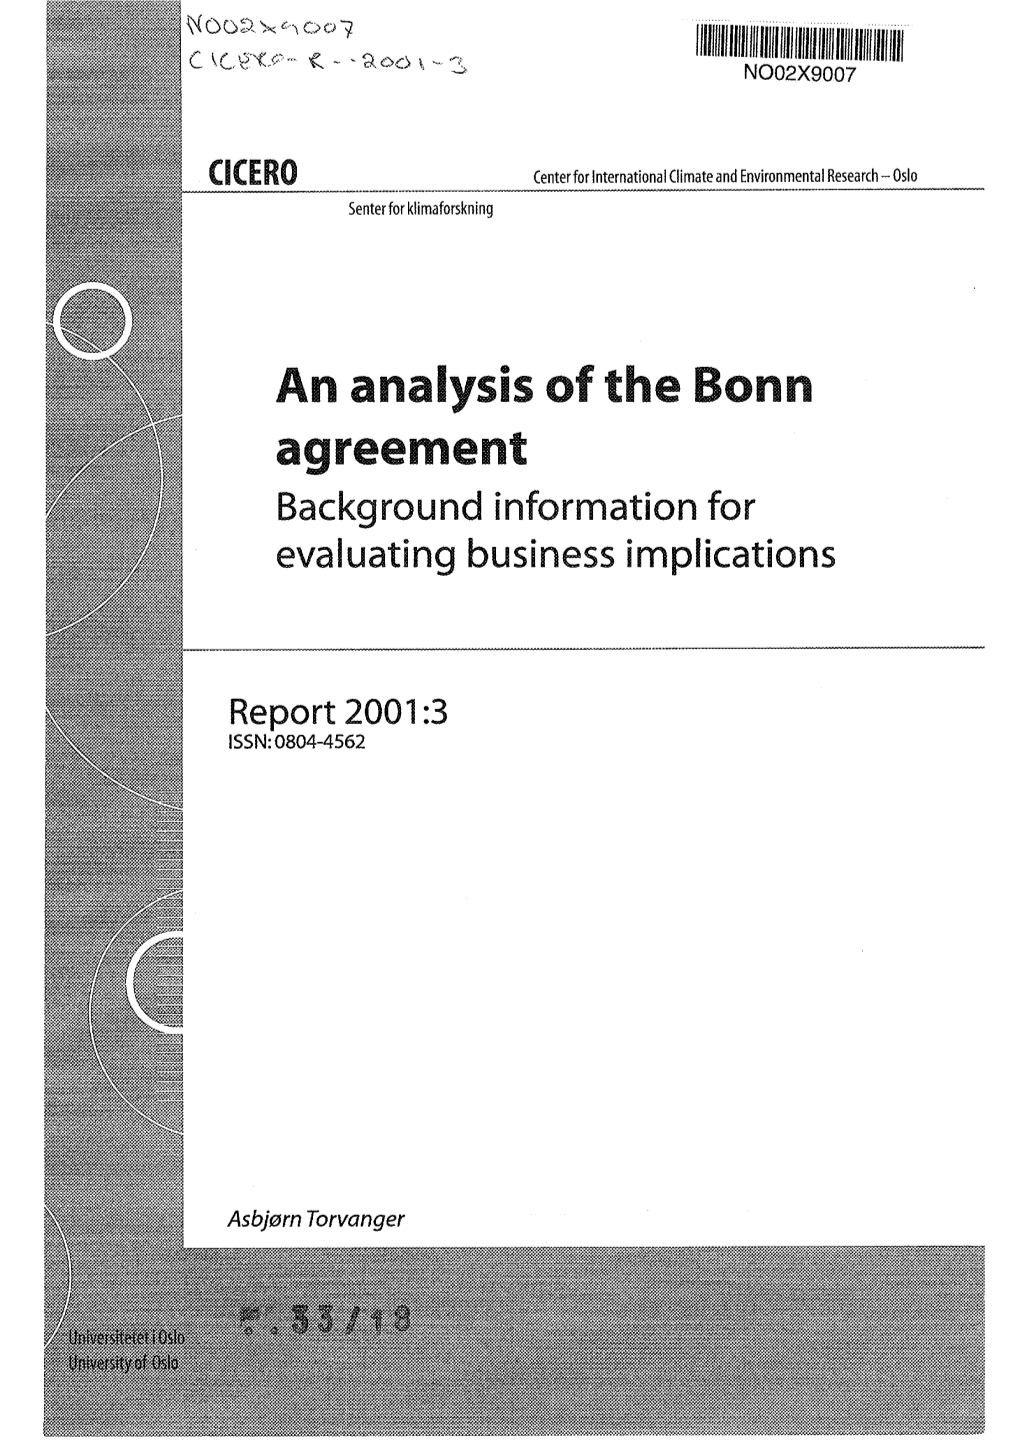 An Analysis of the Bonn Agreement Background Information for Evaluating Business Implications